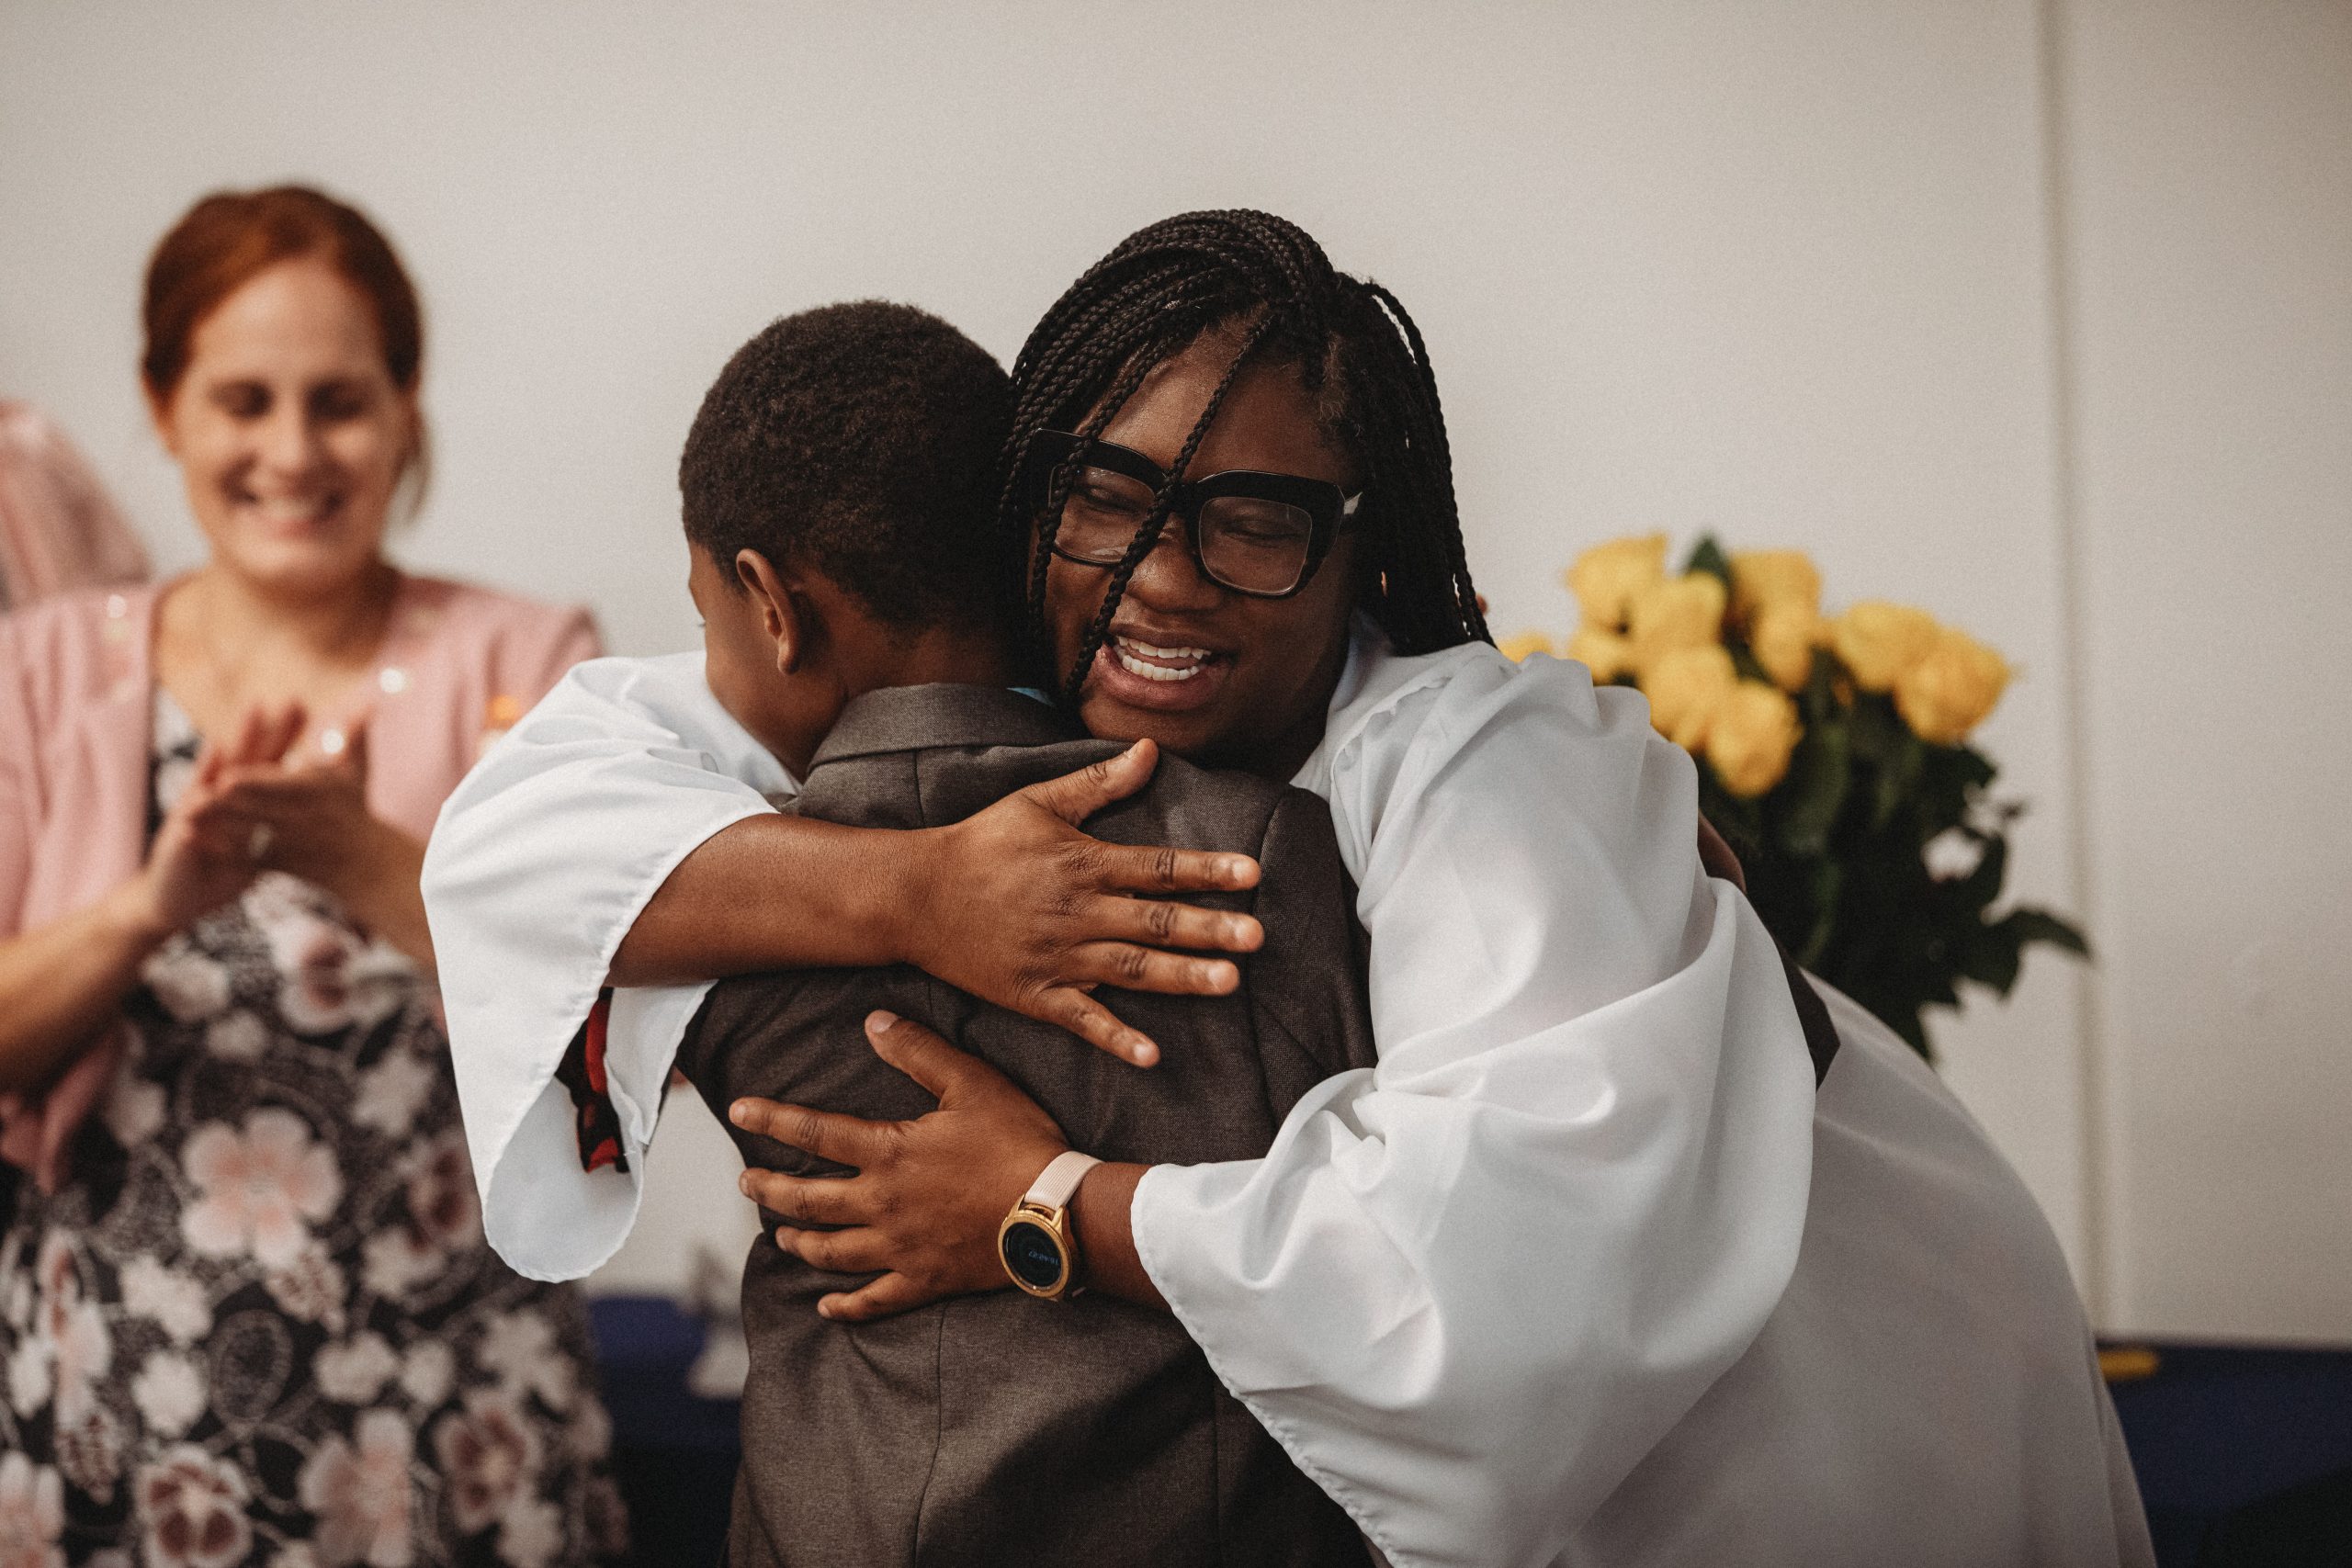 A smith chason college graduate is in her cap and gown smiling big and hugging her young son. Behind her is a Smith Chason staff member smiling and clapping in celebration of the new grad